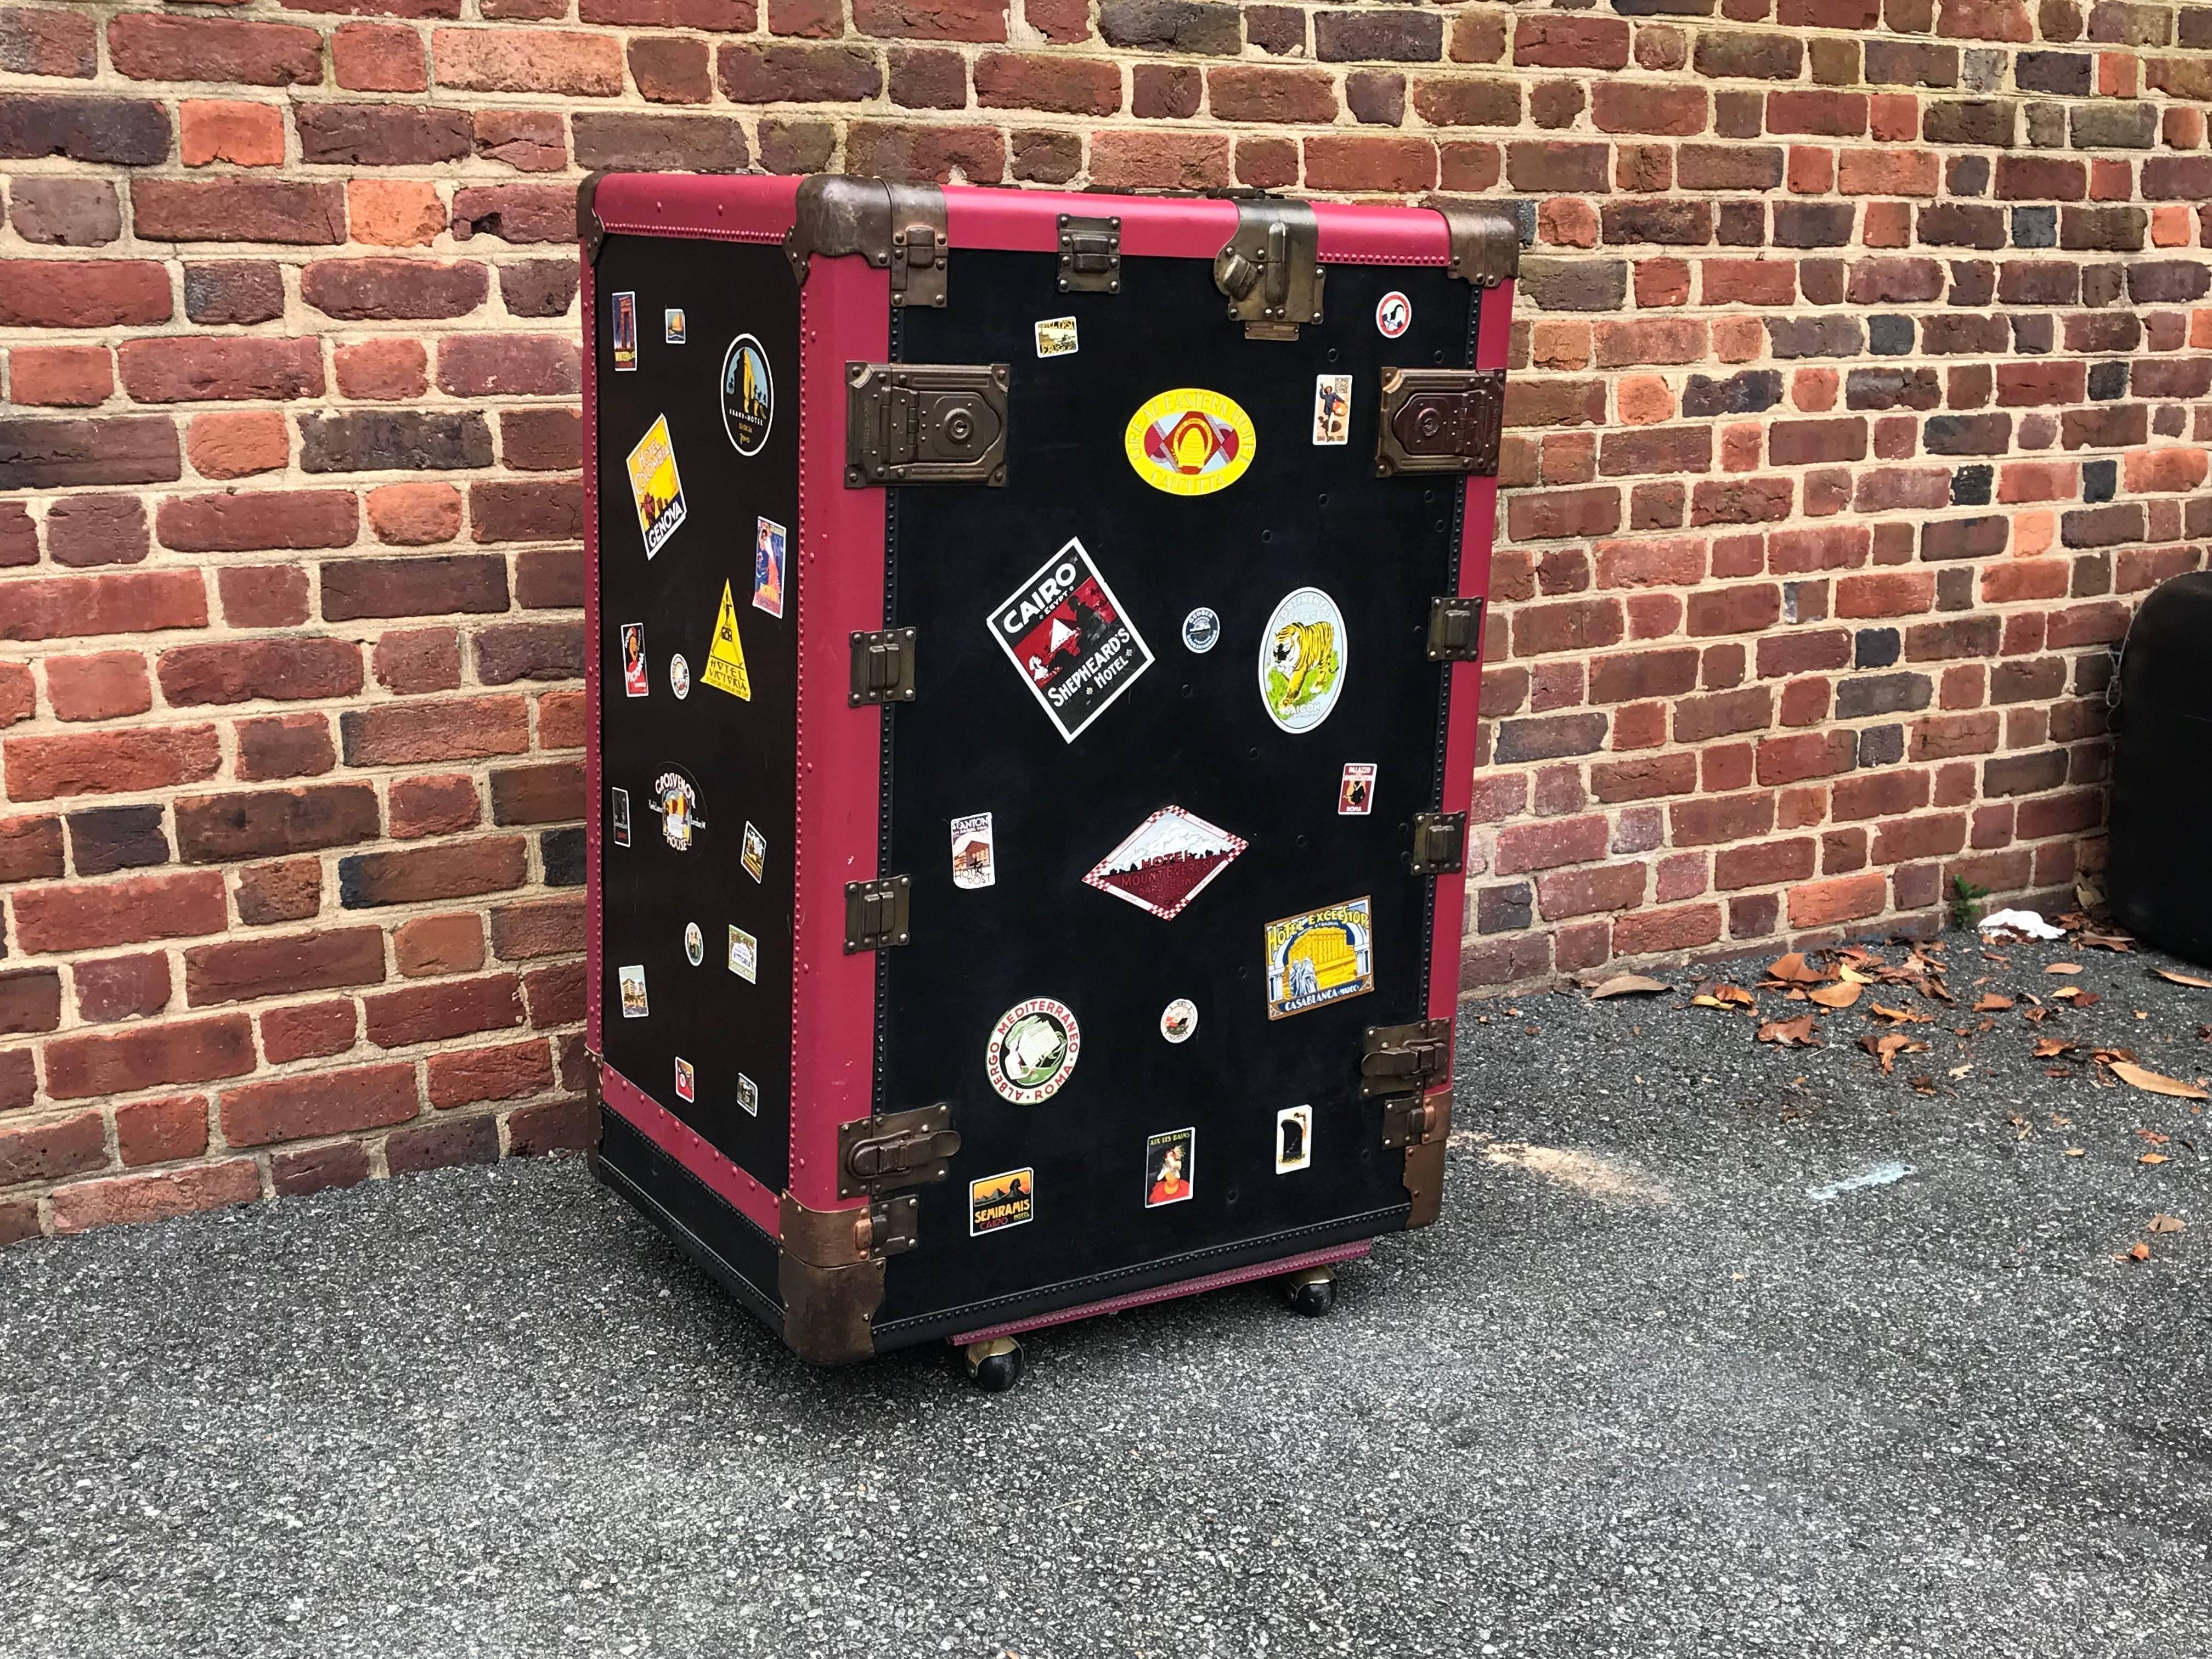 Offered is a gorgeous, 1930s Hartmann Trunk Co. turn table leather steamer wardrobe trunk, from the Pathfinder collection for Saks Fifth Avenue. Left side opens to hanging bar. Right side opens to drawers. Exterior has been covered in stickers from